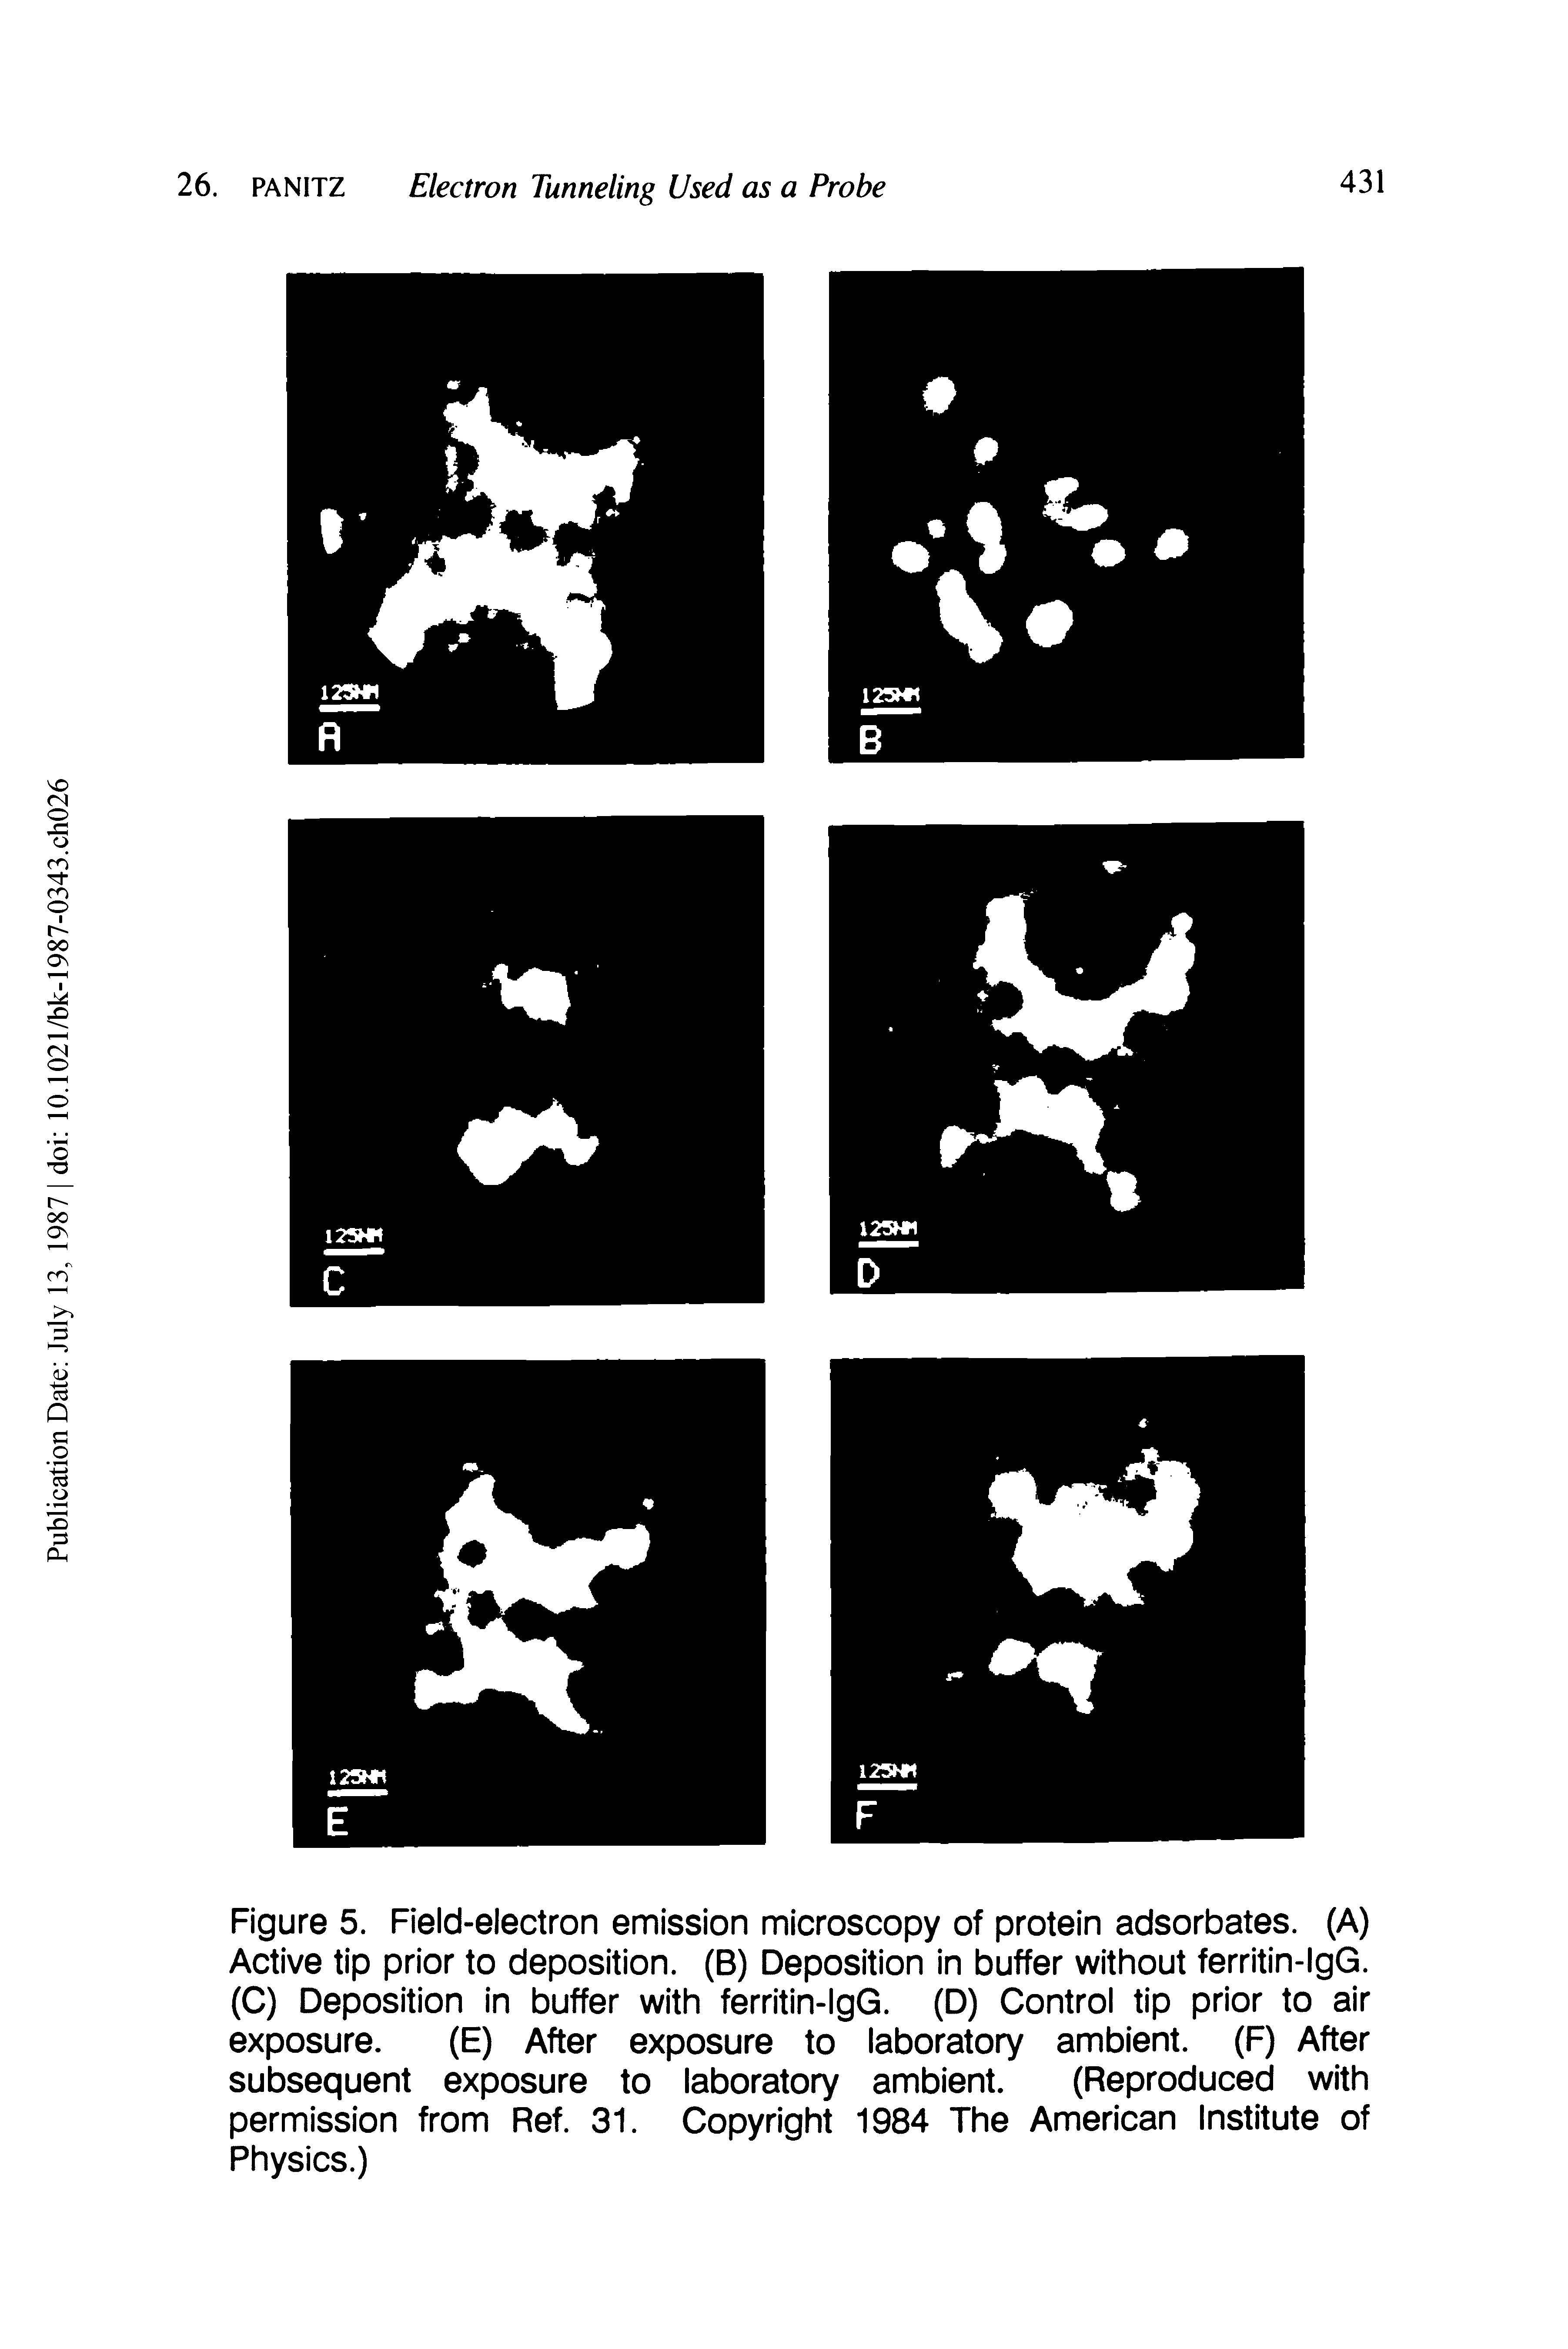 Figure 5. Field-electron emission microscopy of protein adsorbates. (A) Active tip prior to deposition. (B) Deposition in buffer without ferritin-IgG. (C) Deposition in buffer with ferritin-IgG. (D) Control tip prior to air exposure. (E) After exposure to laboratory ambient. (F) After...